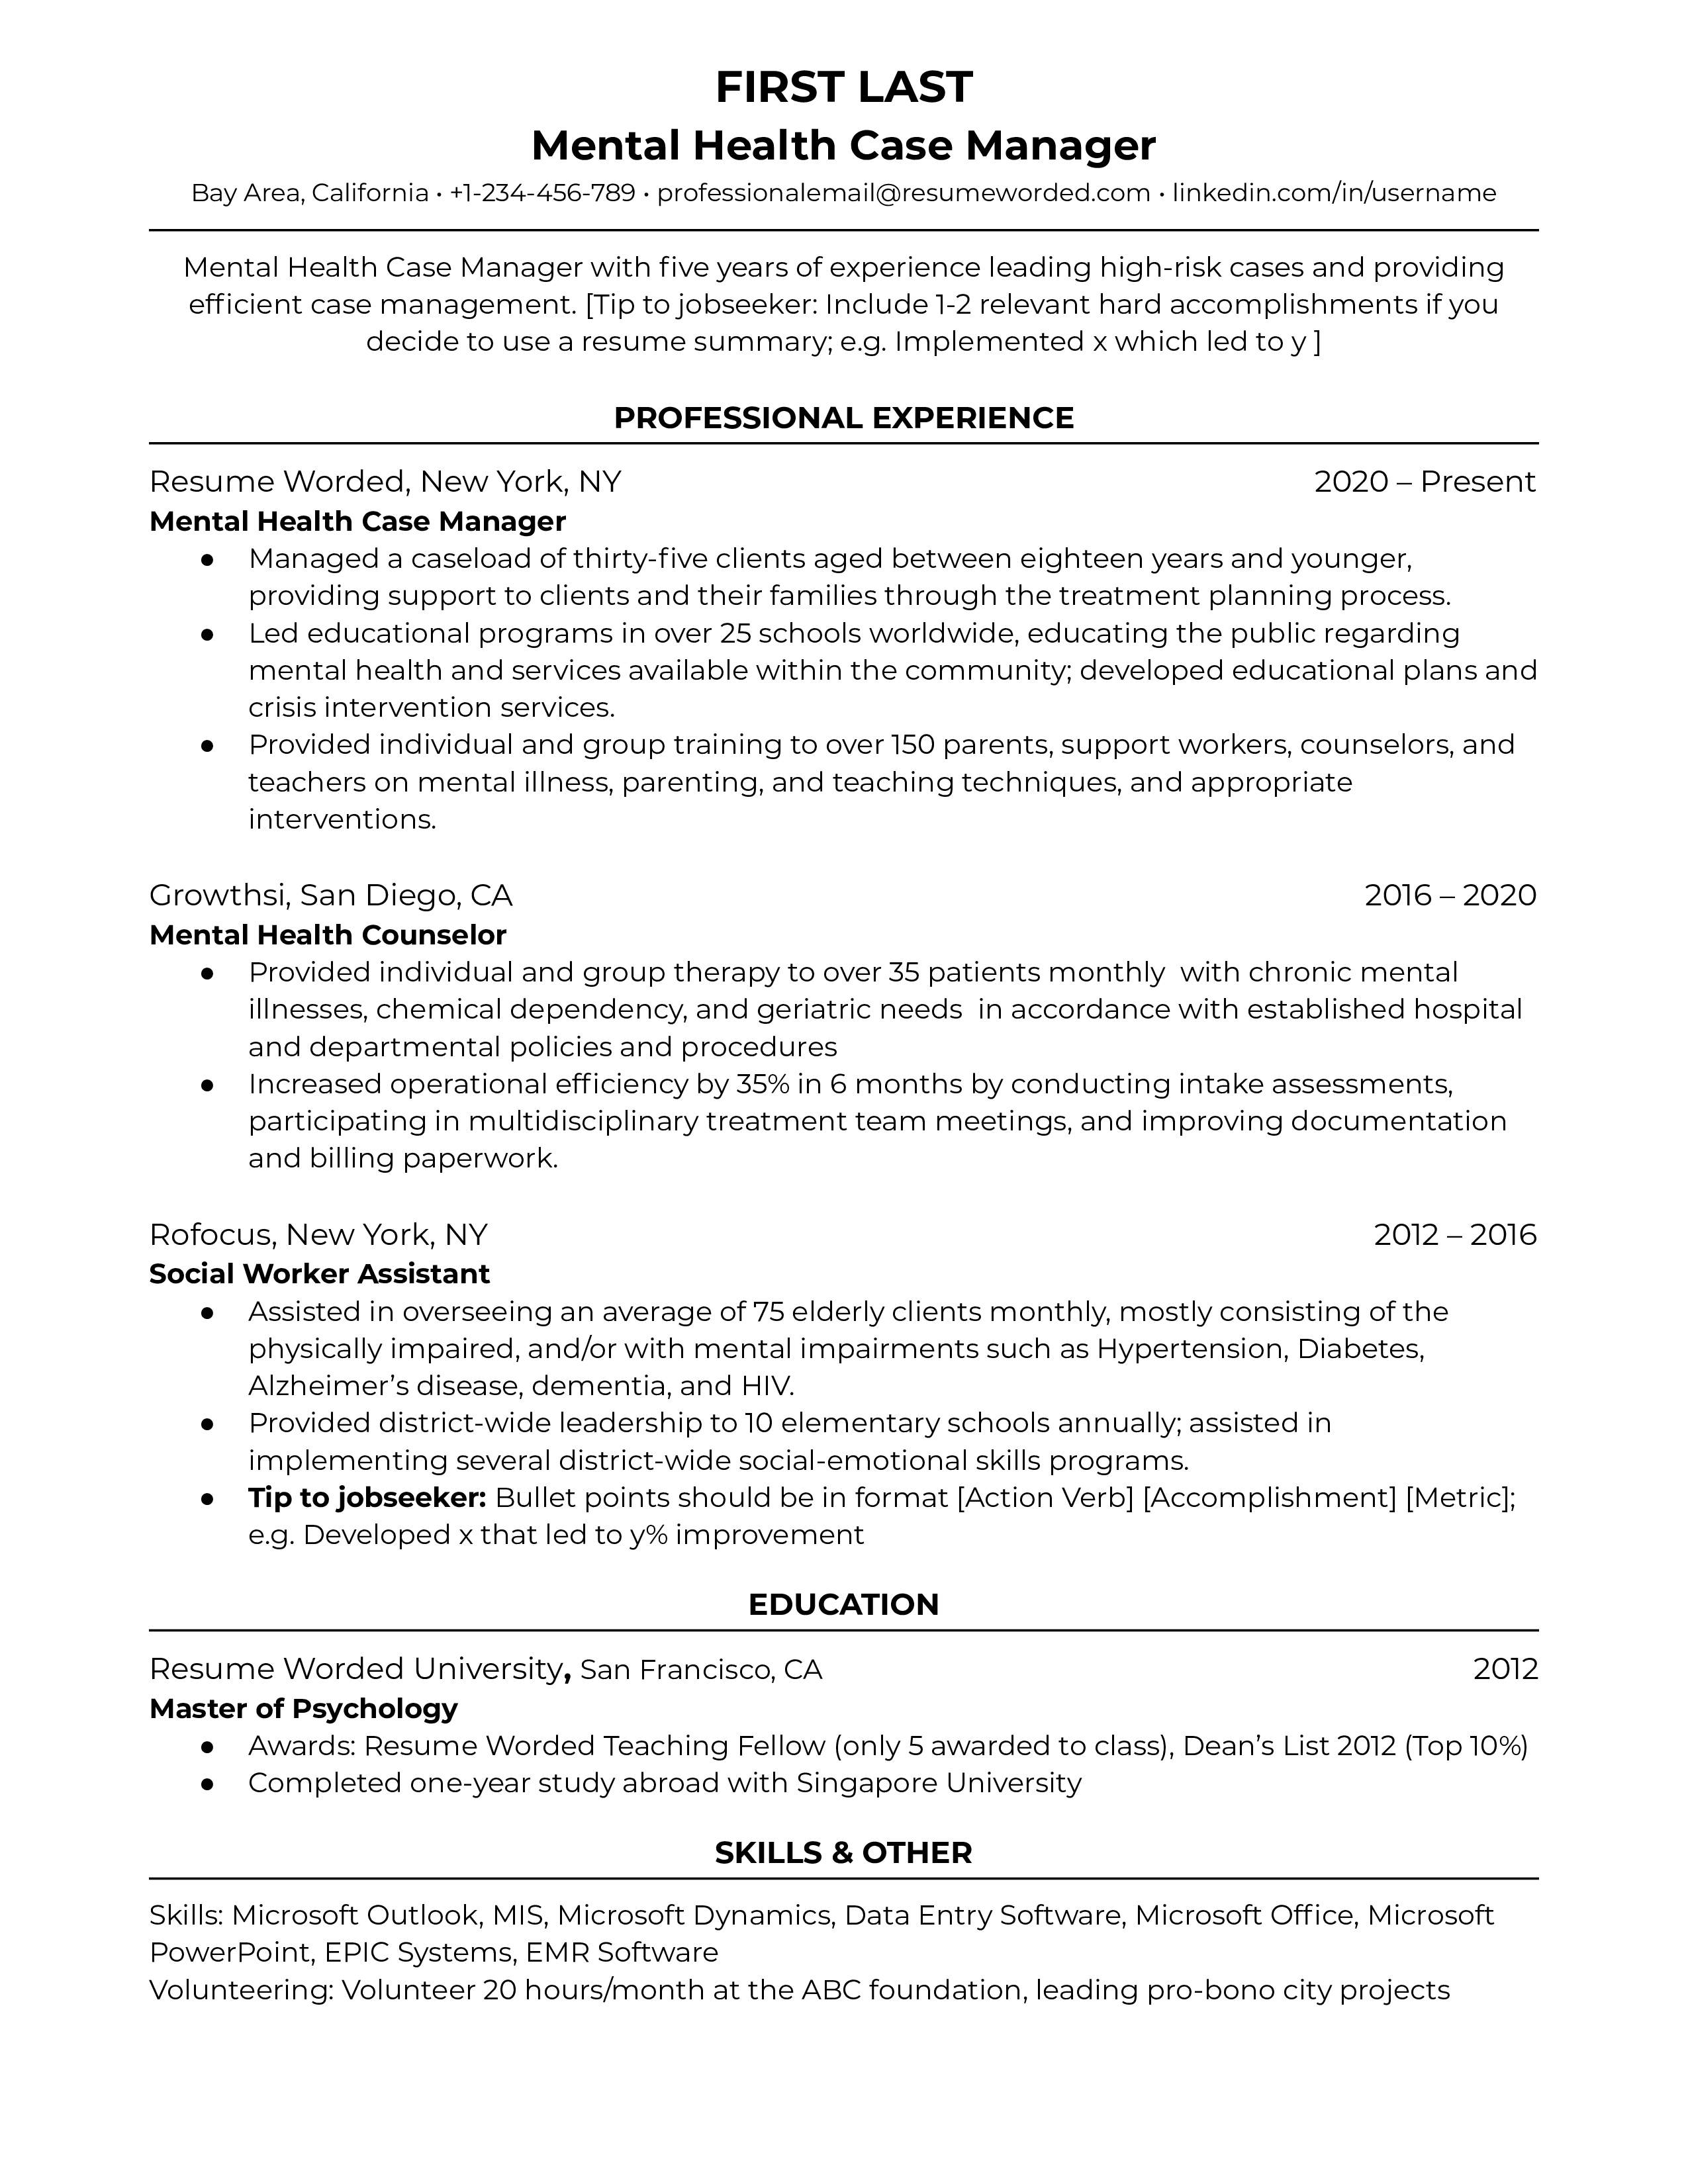 Mental Health Case Manager Resume Template + Example